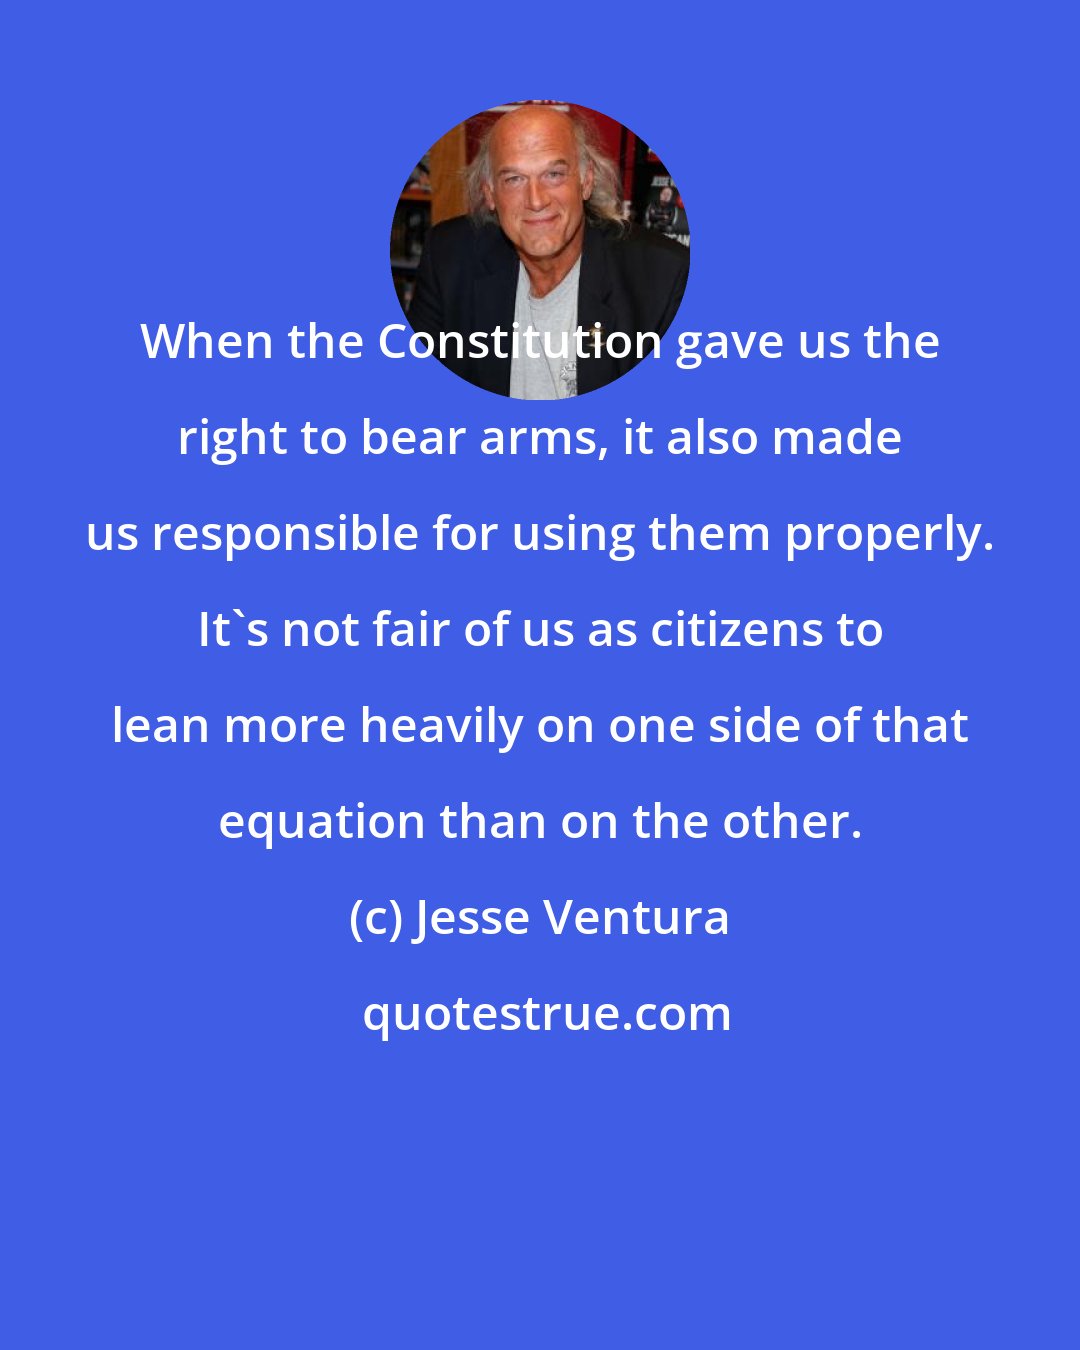 Jesse Ventura: When the Constitution gave us the right to bear arms, it also made us responsible for using them properly. It's not fair of us as citizens to lean more heavily on one side of that equation than on the other.